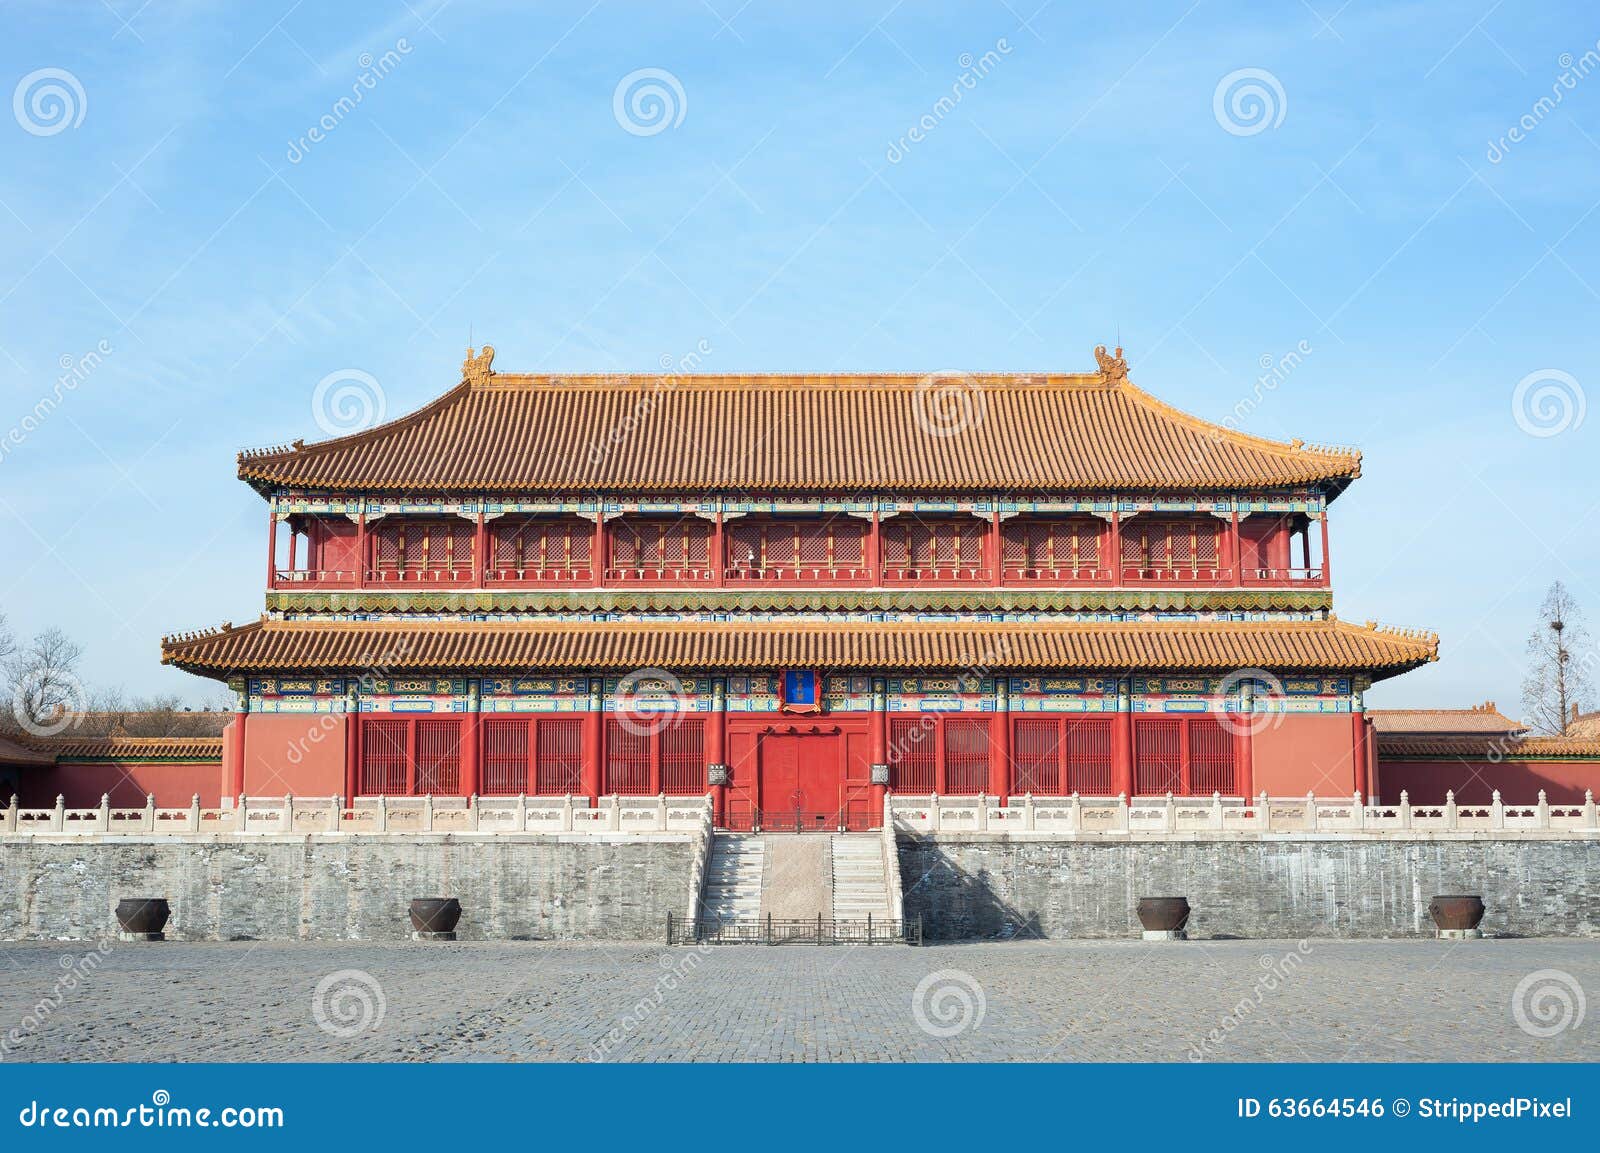 large water cauldrons outside the tower of enhanced righteousness in the main courtyard of the forbidden city, beijing.